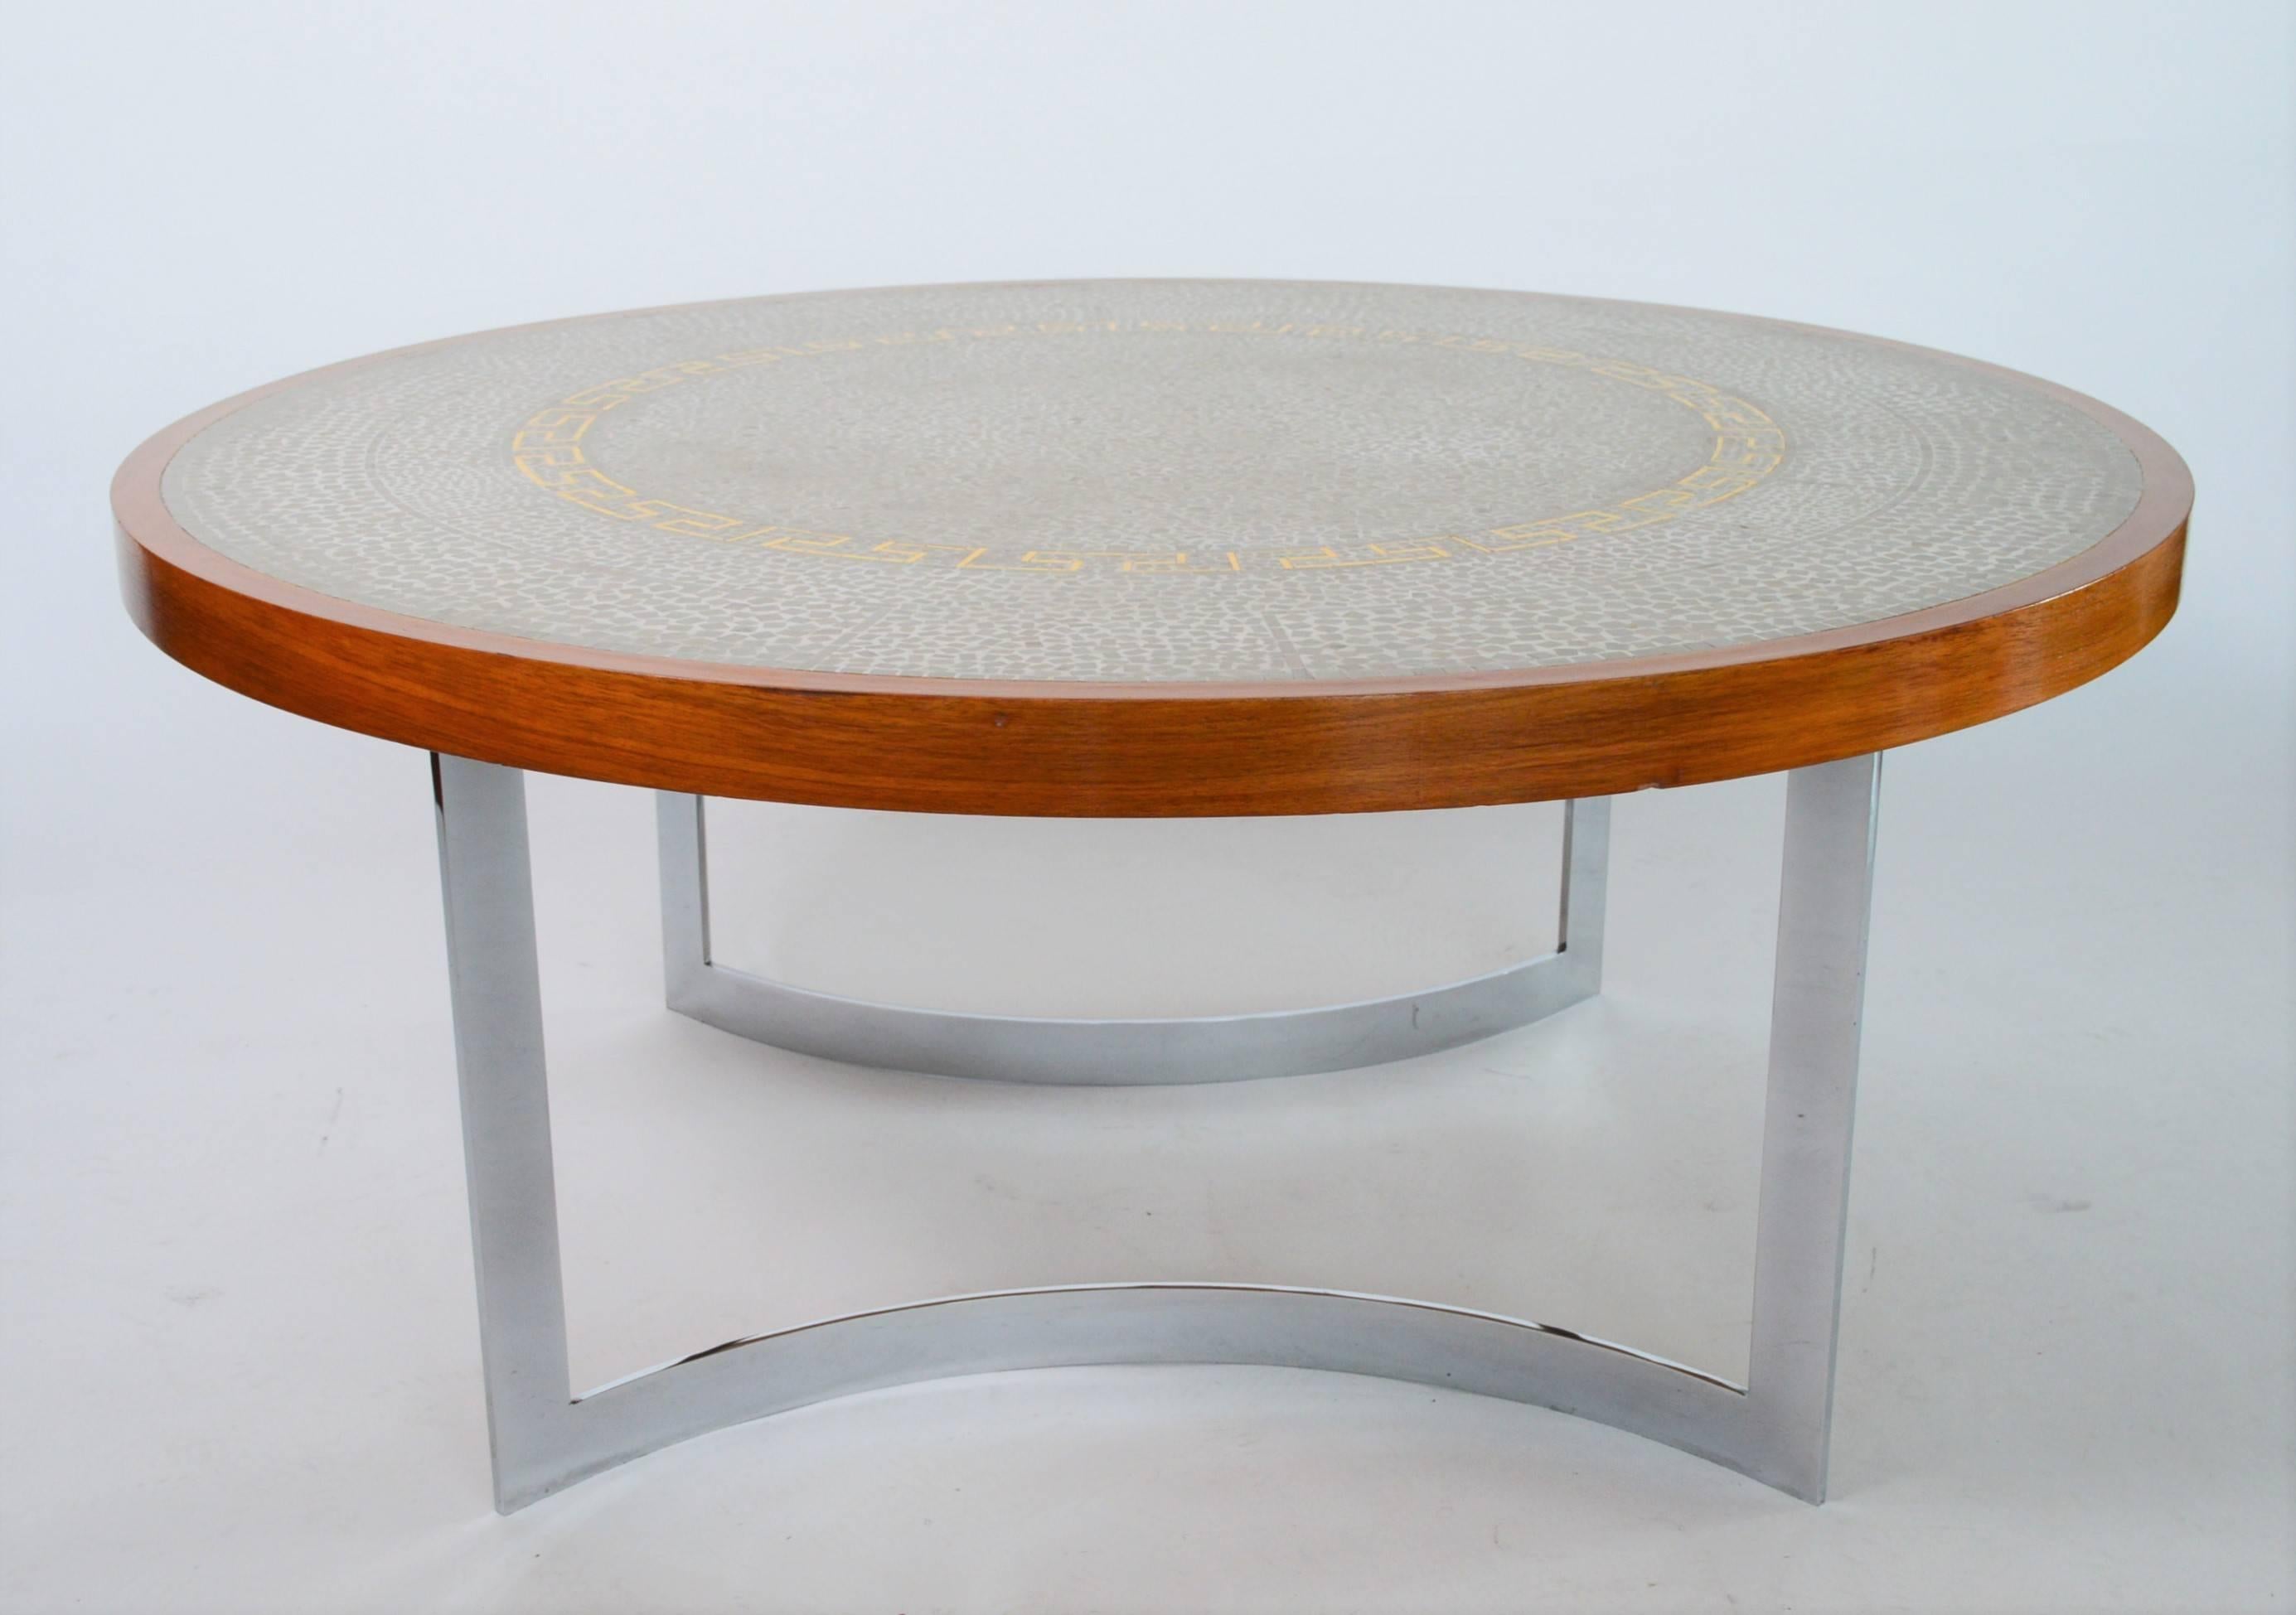 Beautiful midcentury coffee table with a round mosaic tile top, wooden table frame (made of clear walnut) and two curved, chromed and strong legs.
Designed and made by Berthold Müller, Germany, in 1966 (please see label under the table).
The